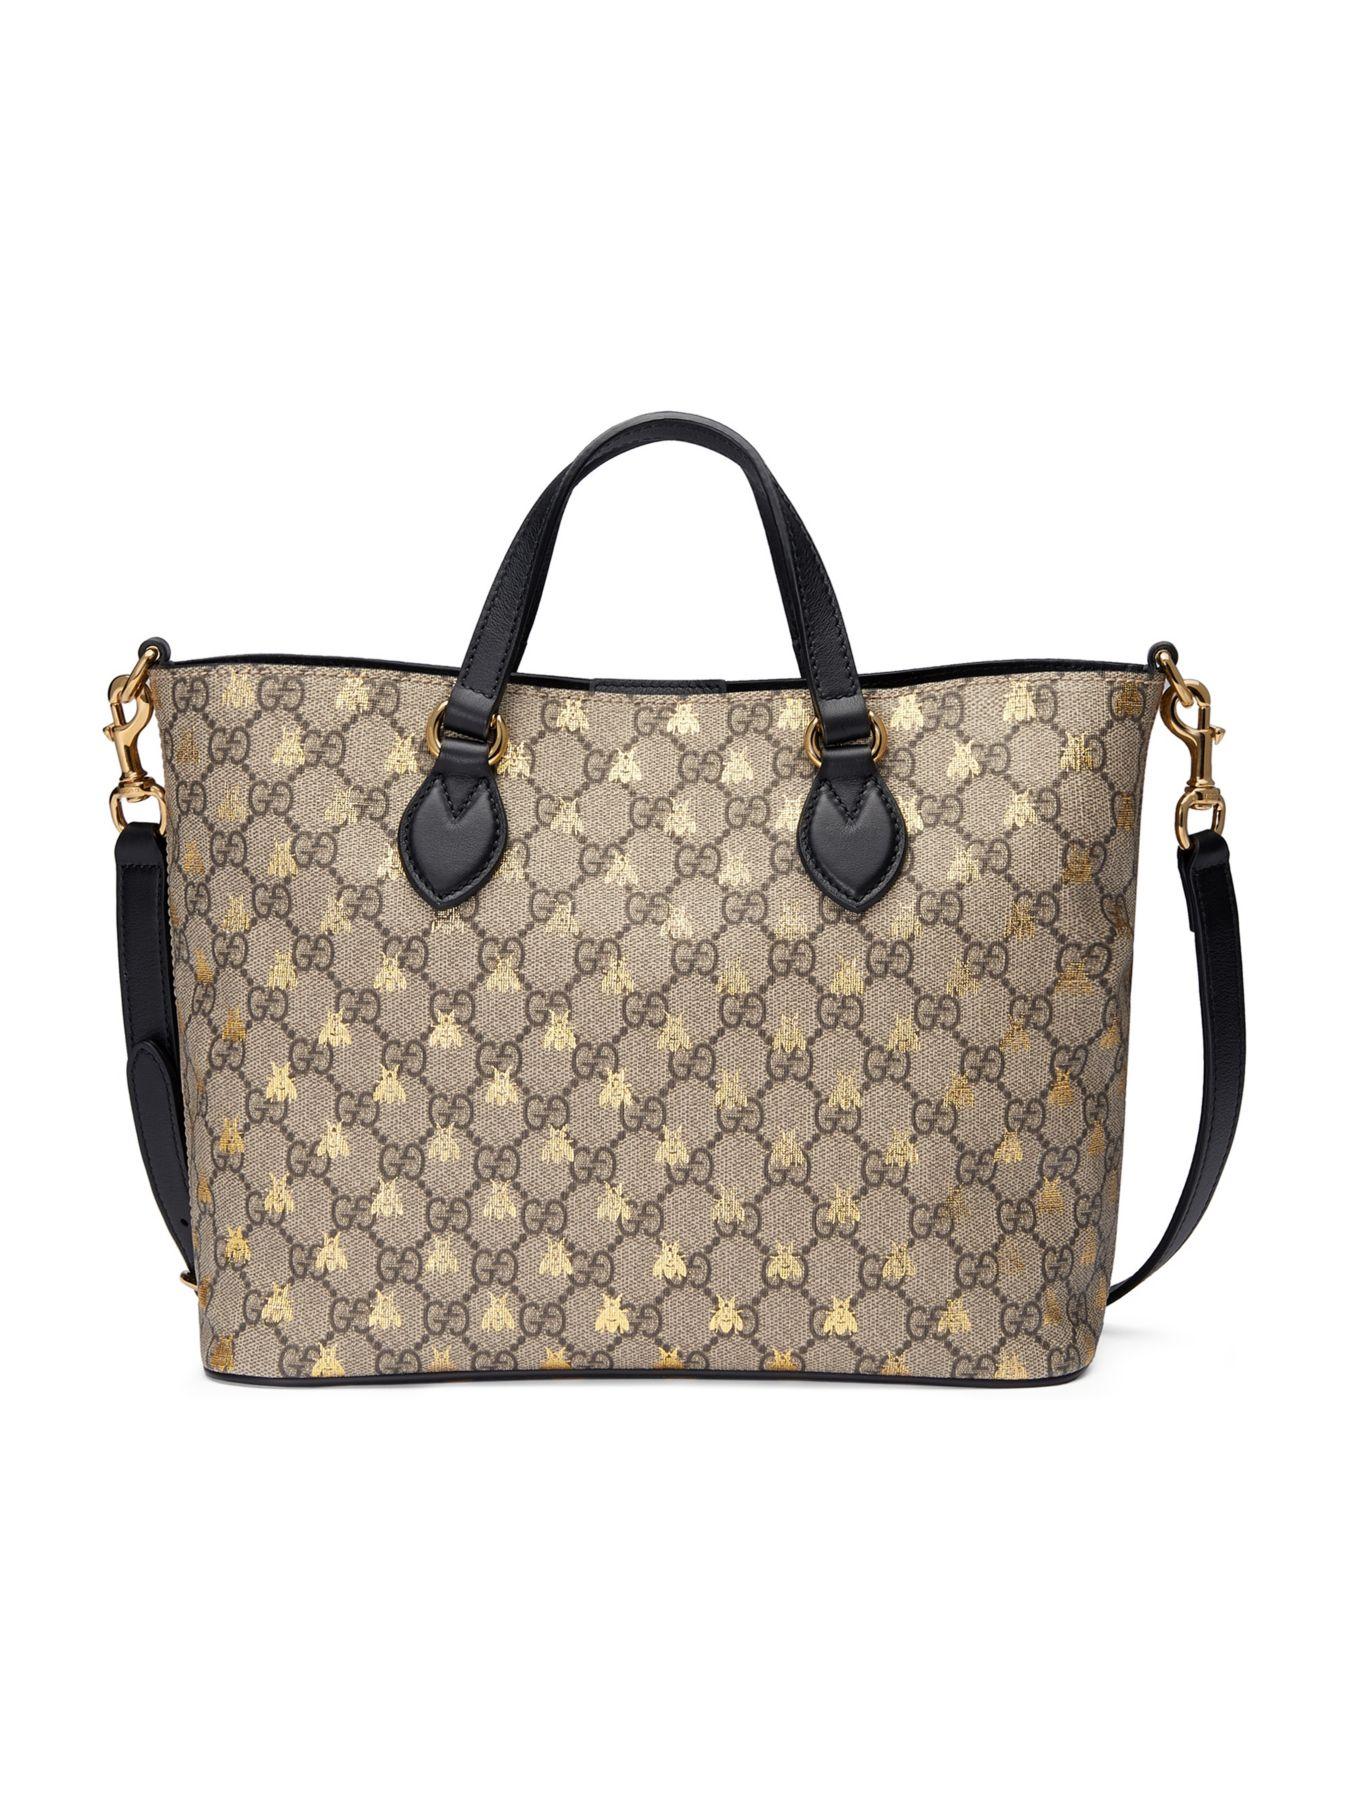 Gucci Leather Bestiary GG Supreme Tote Bag in Black/Brown (Brown) - Save 21% - Lyst